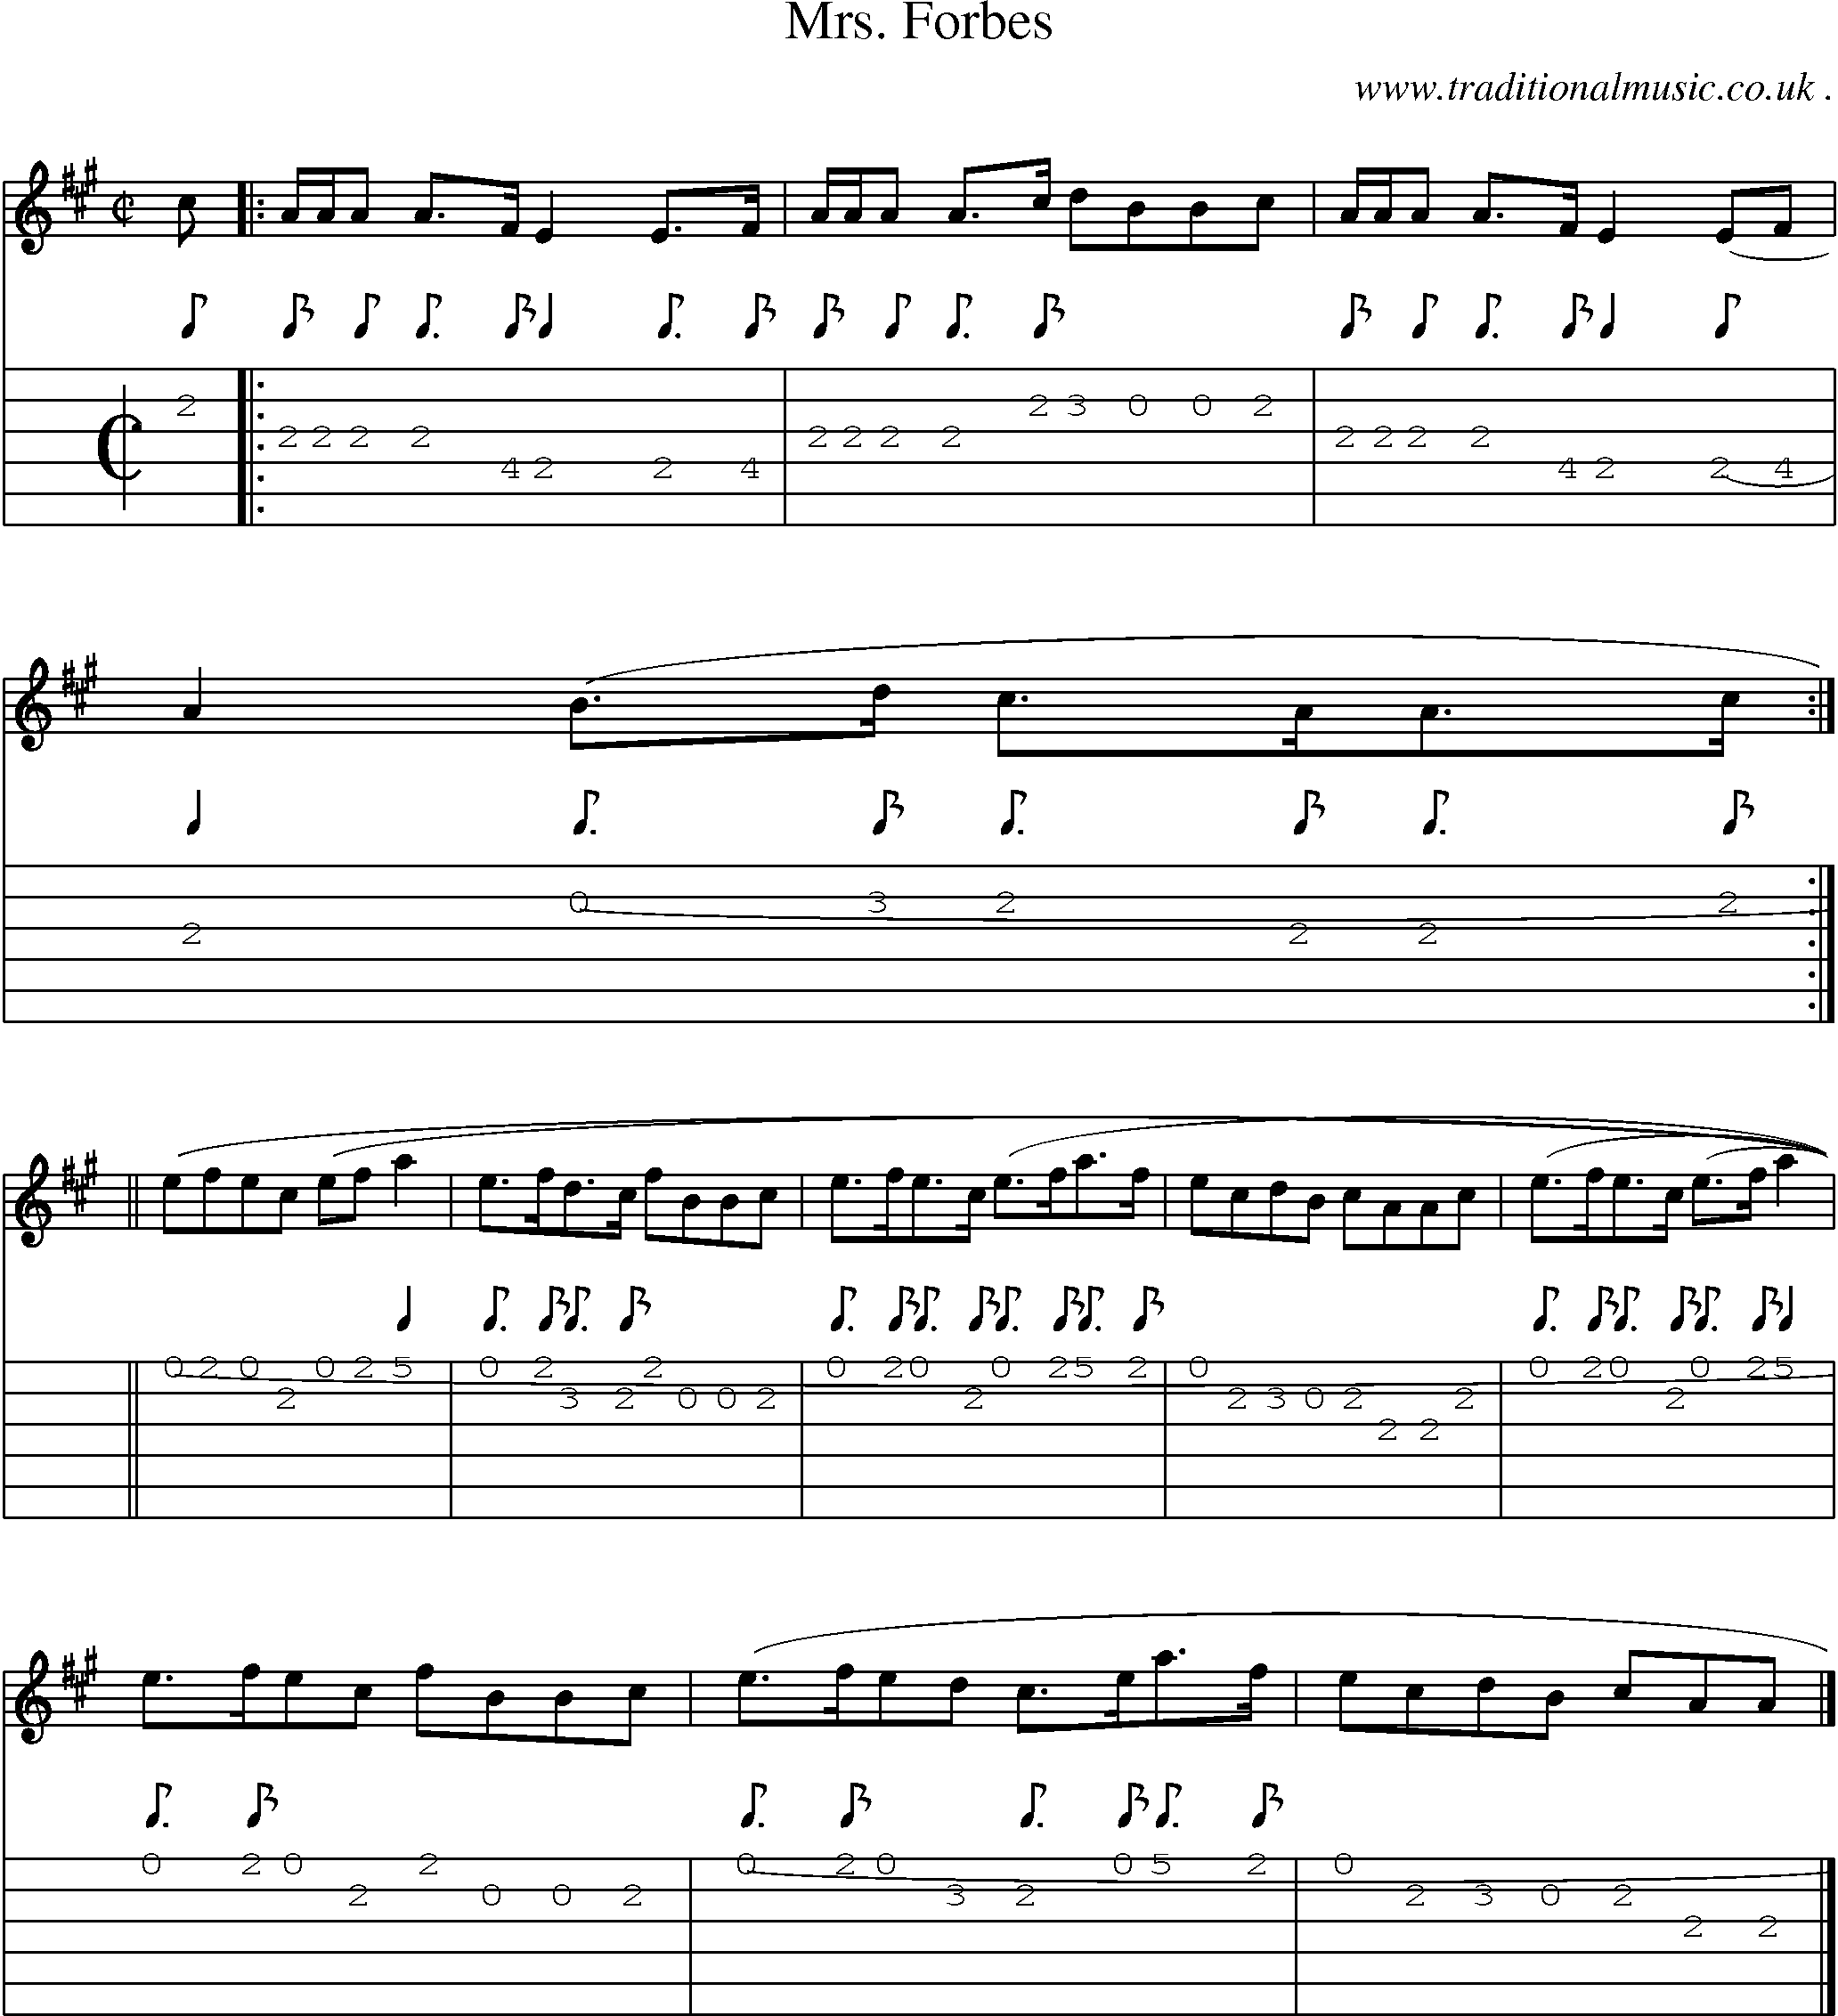 Sheet-music  score, Chords and Guitar Tabs for Mrs Forbes